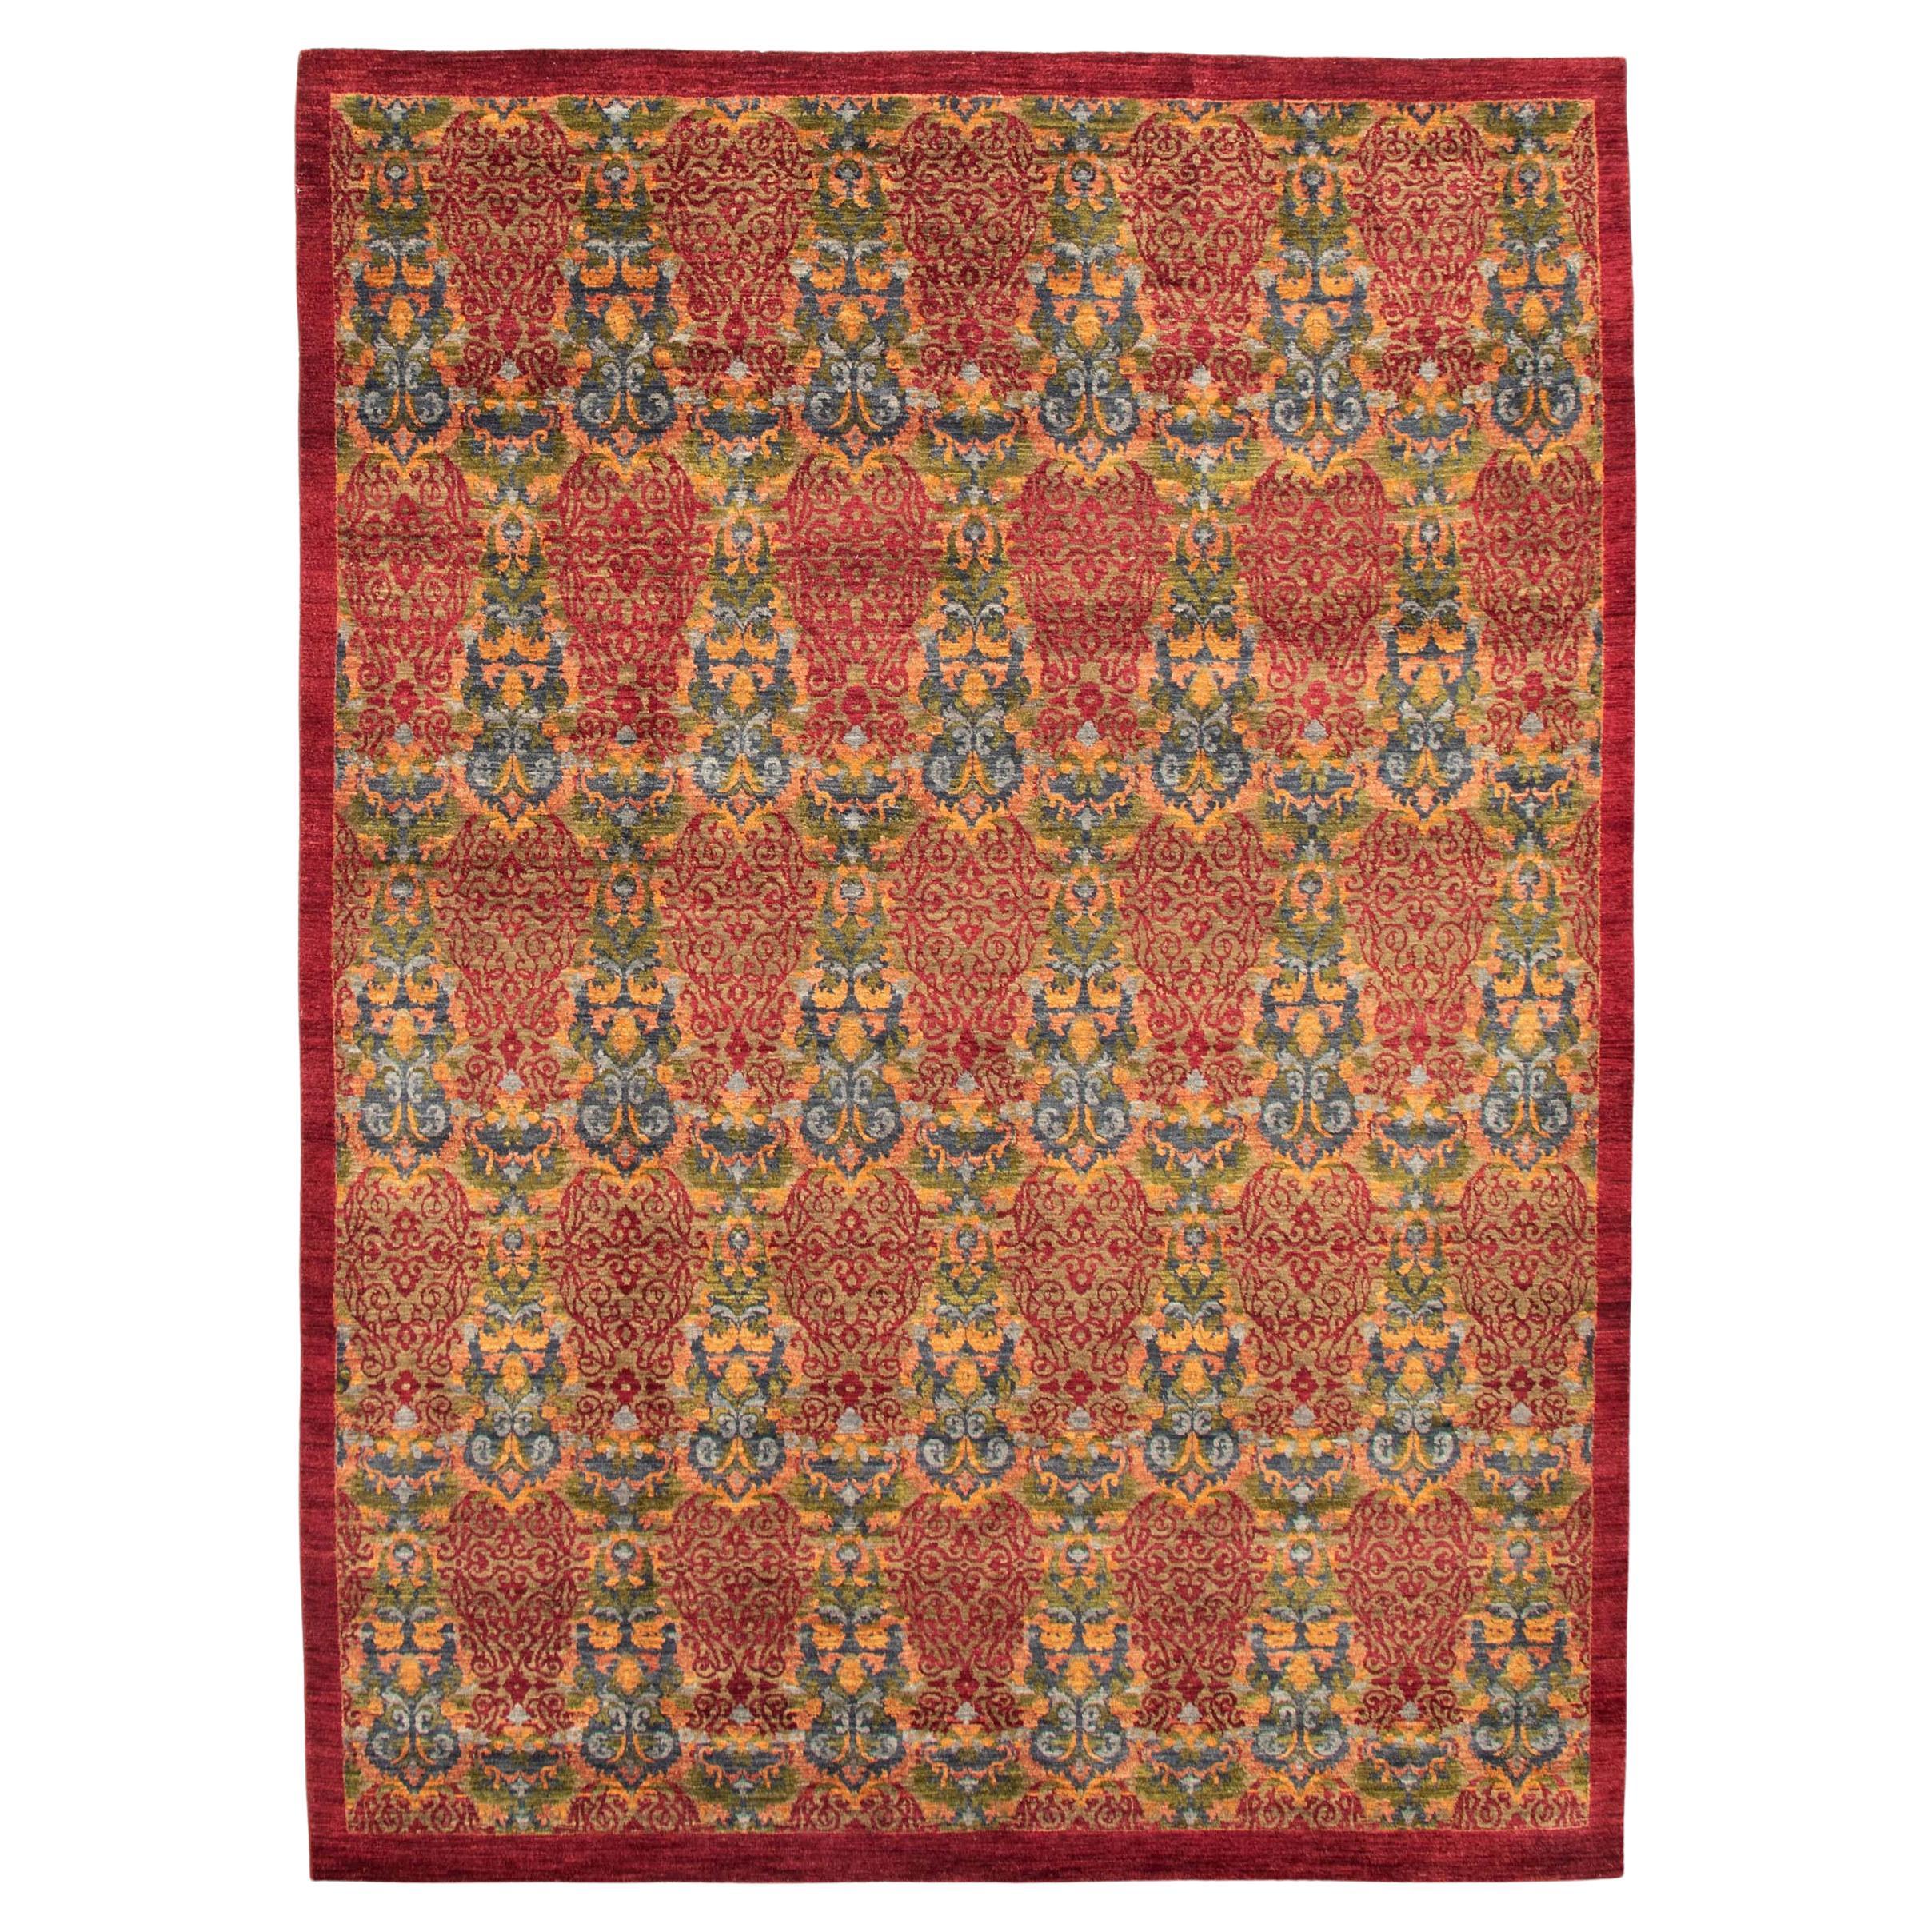 Lahore Carpet, Transitional, Red, Taupe, Blue, and Green, Wool, 8’ x 10’